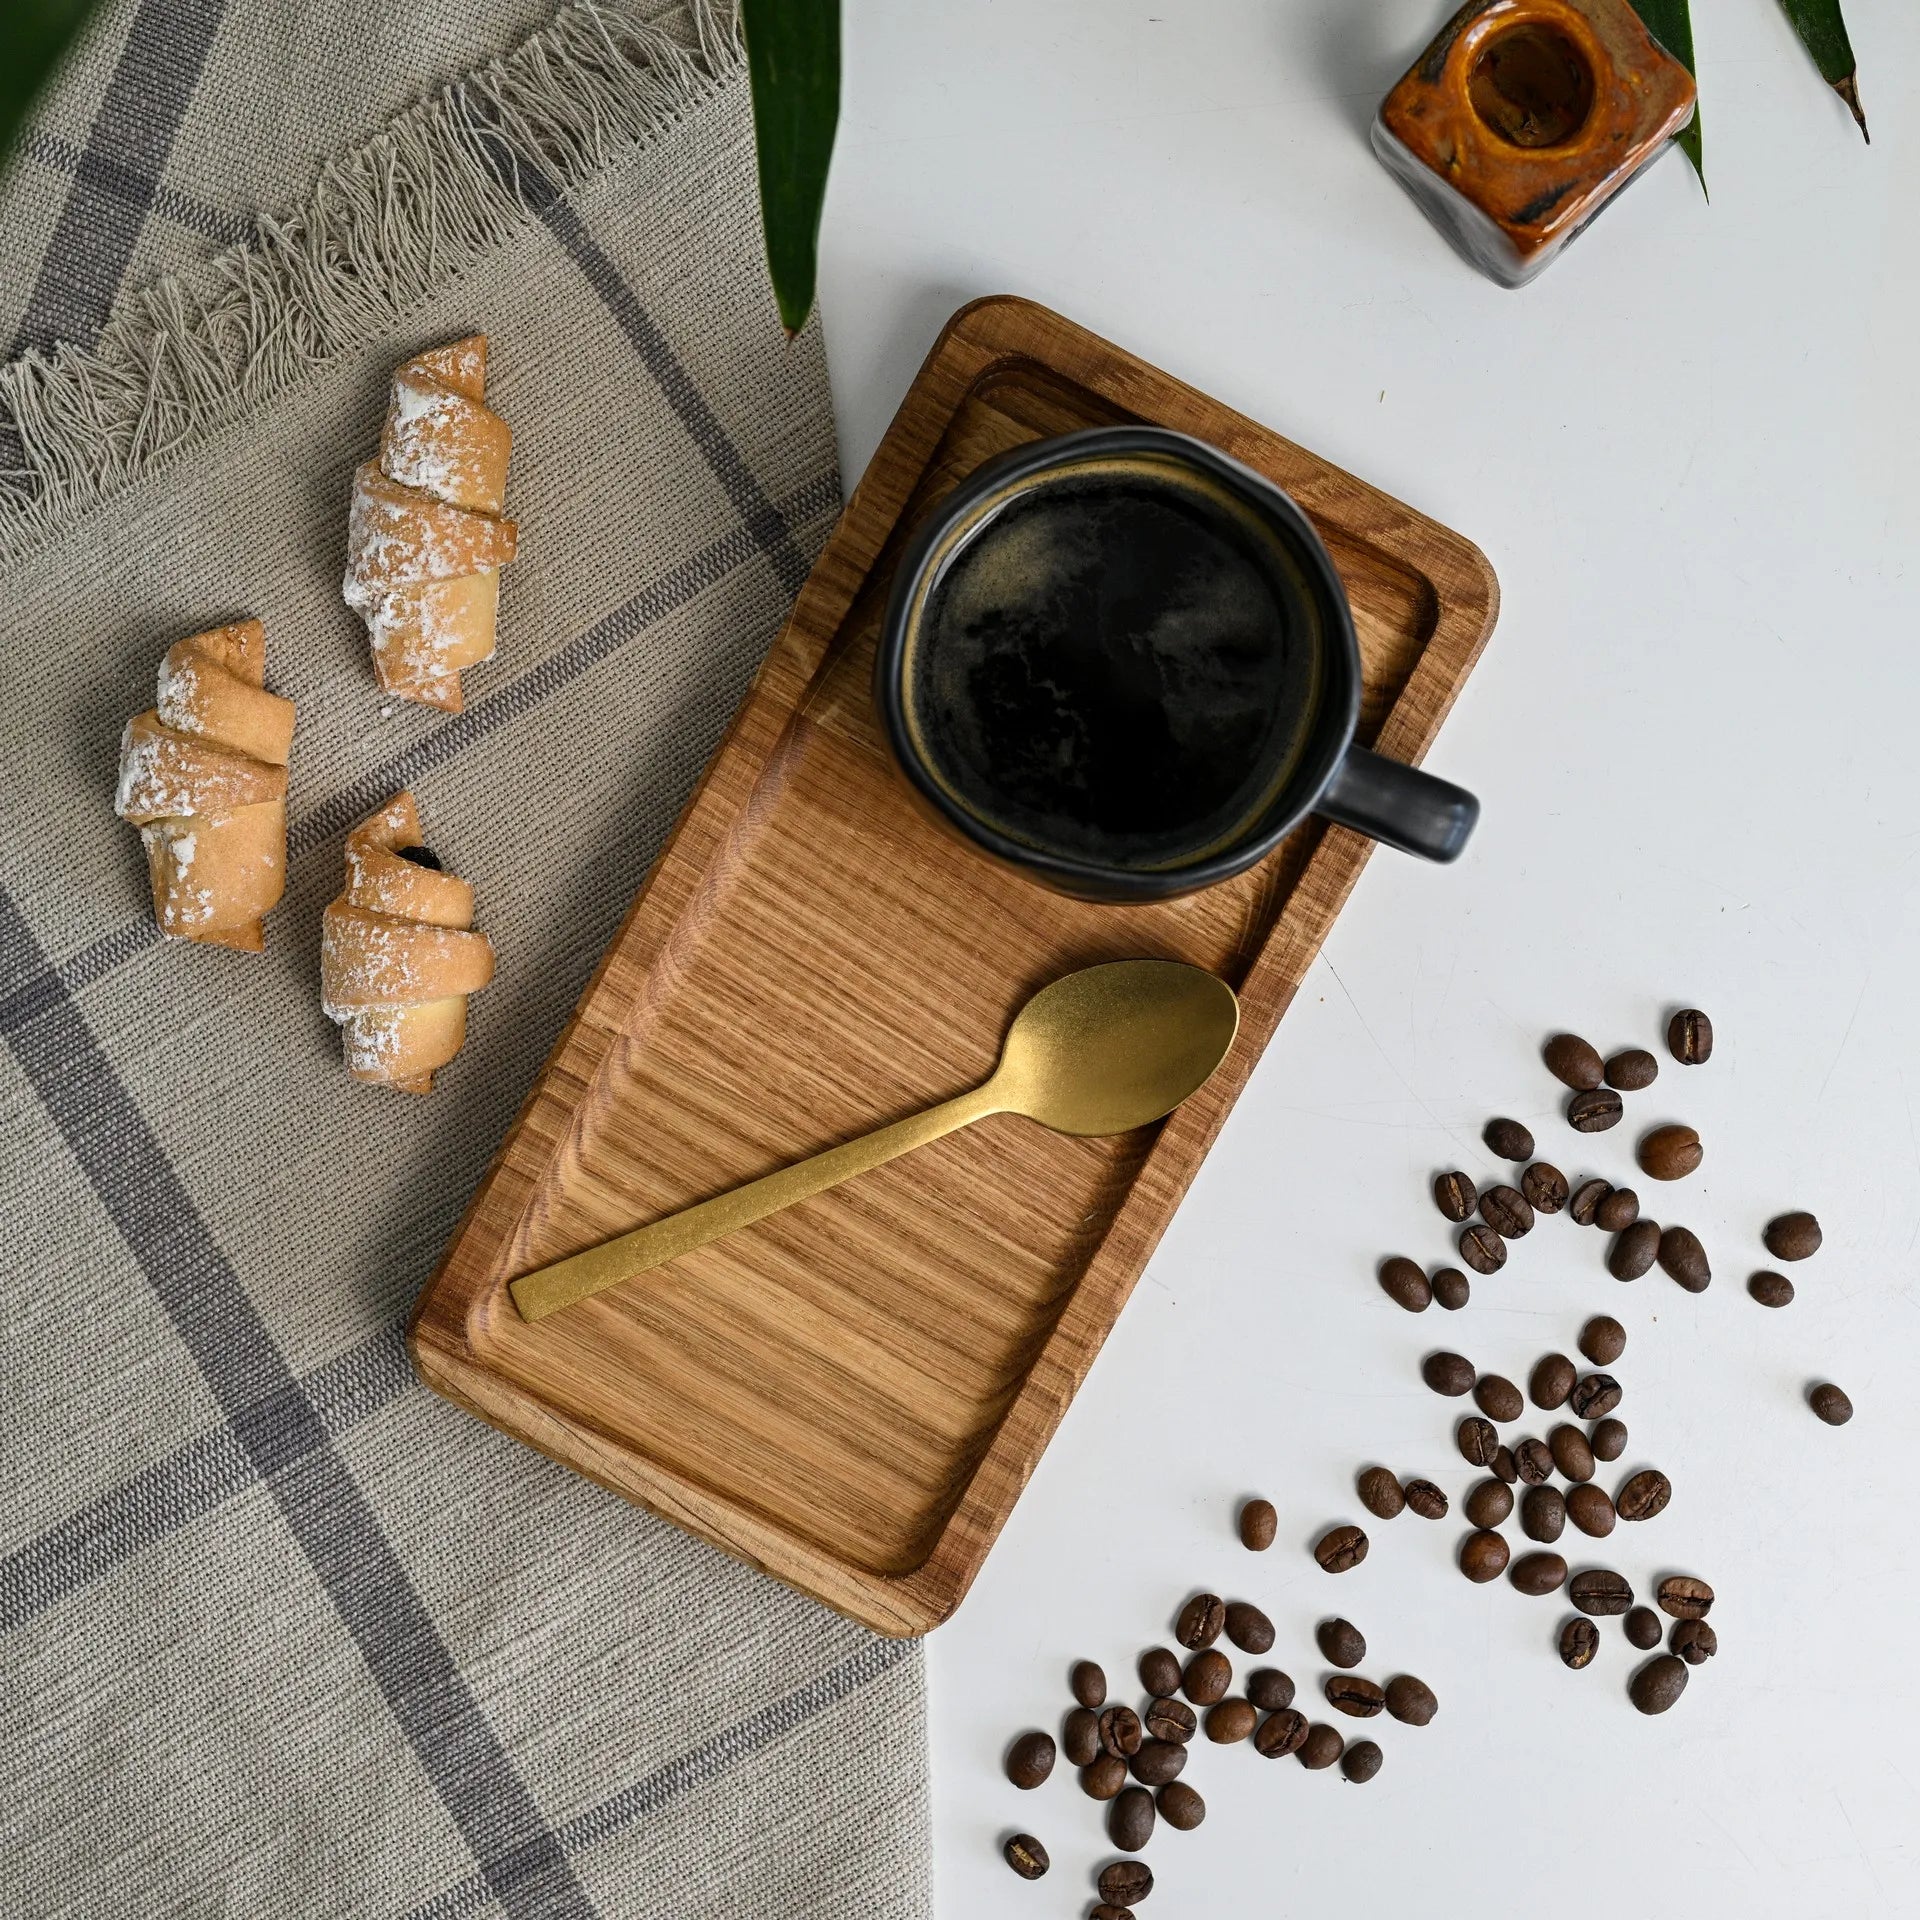 Personalized wooden serving tray, great for presenting meals and beverages in hotels with a rustic touch.